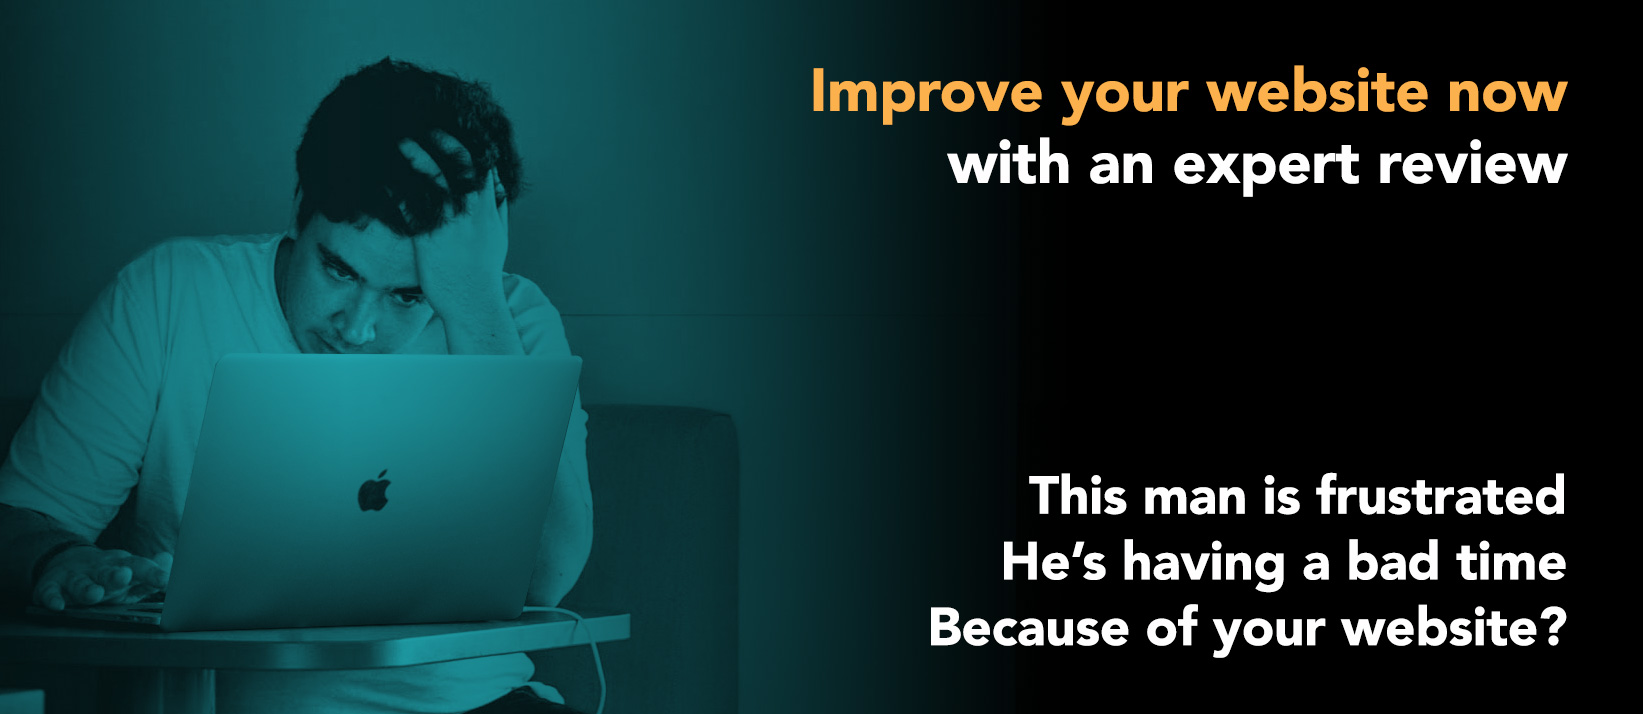 A man with his head in his hands in front of a laptop. "Improve your website now with a website review."